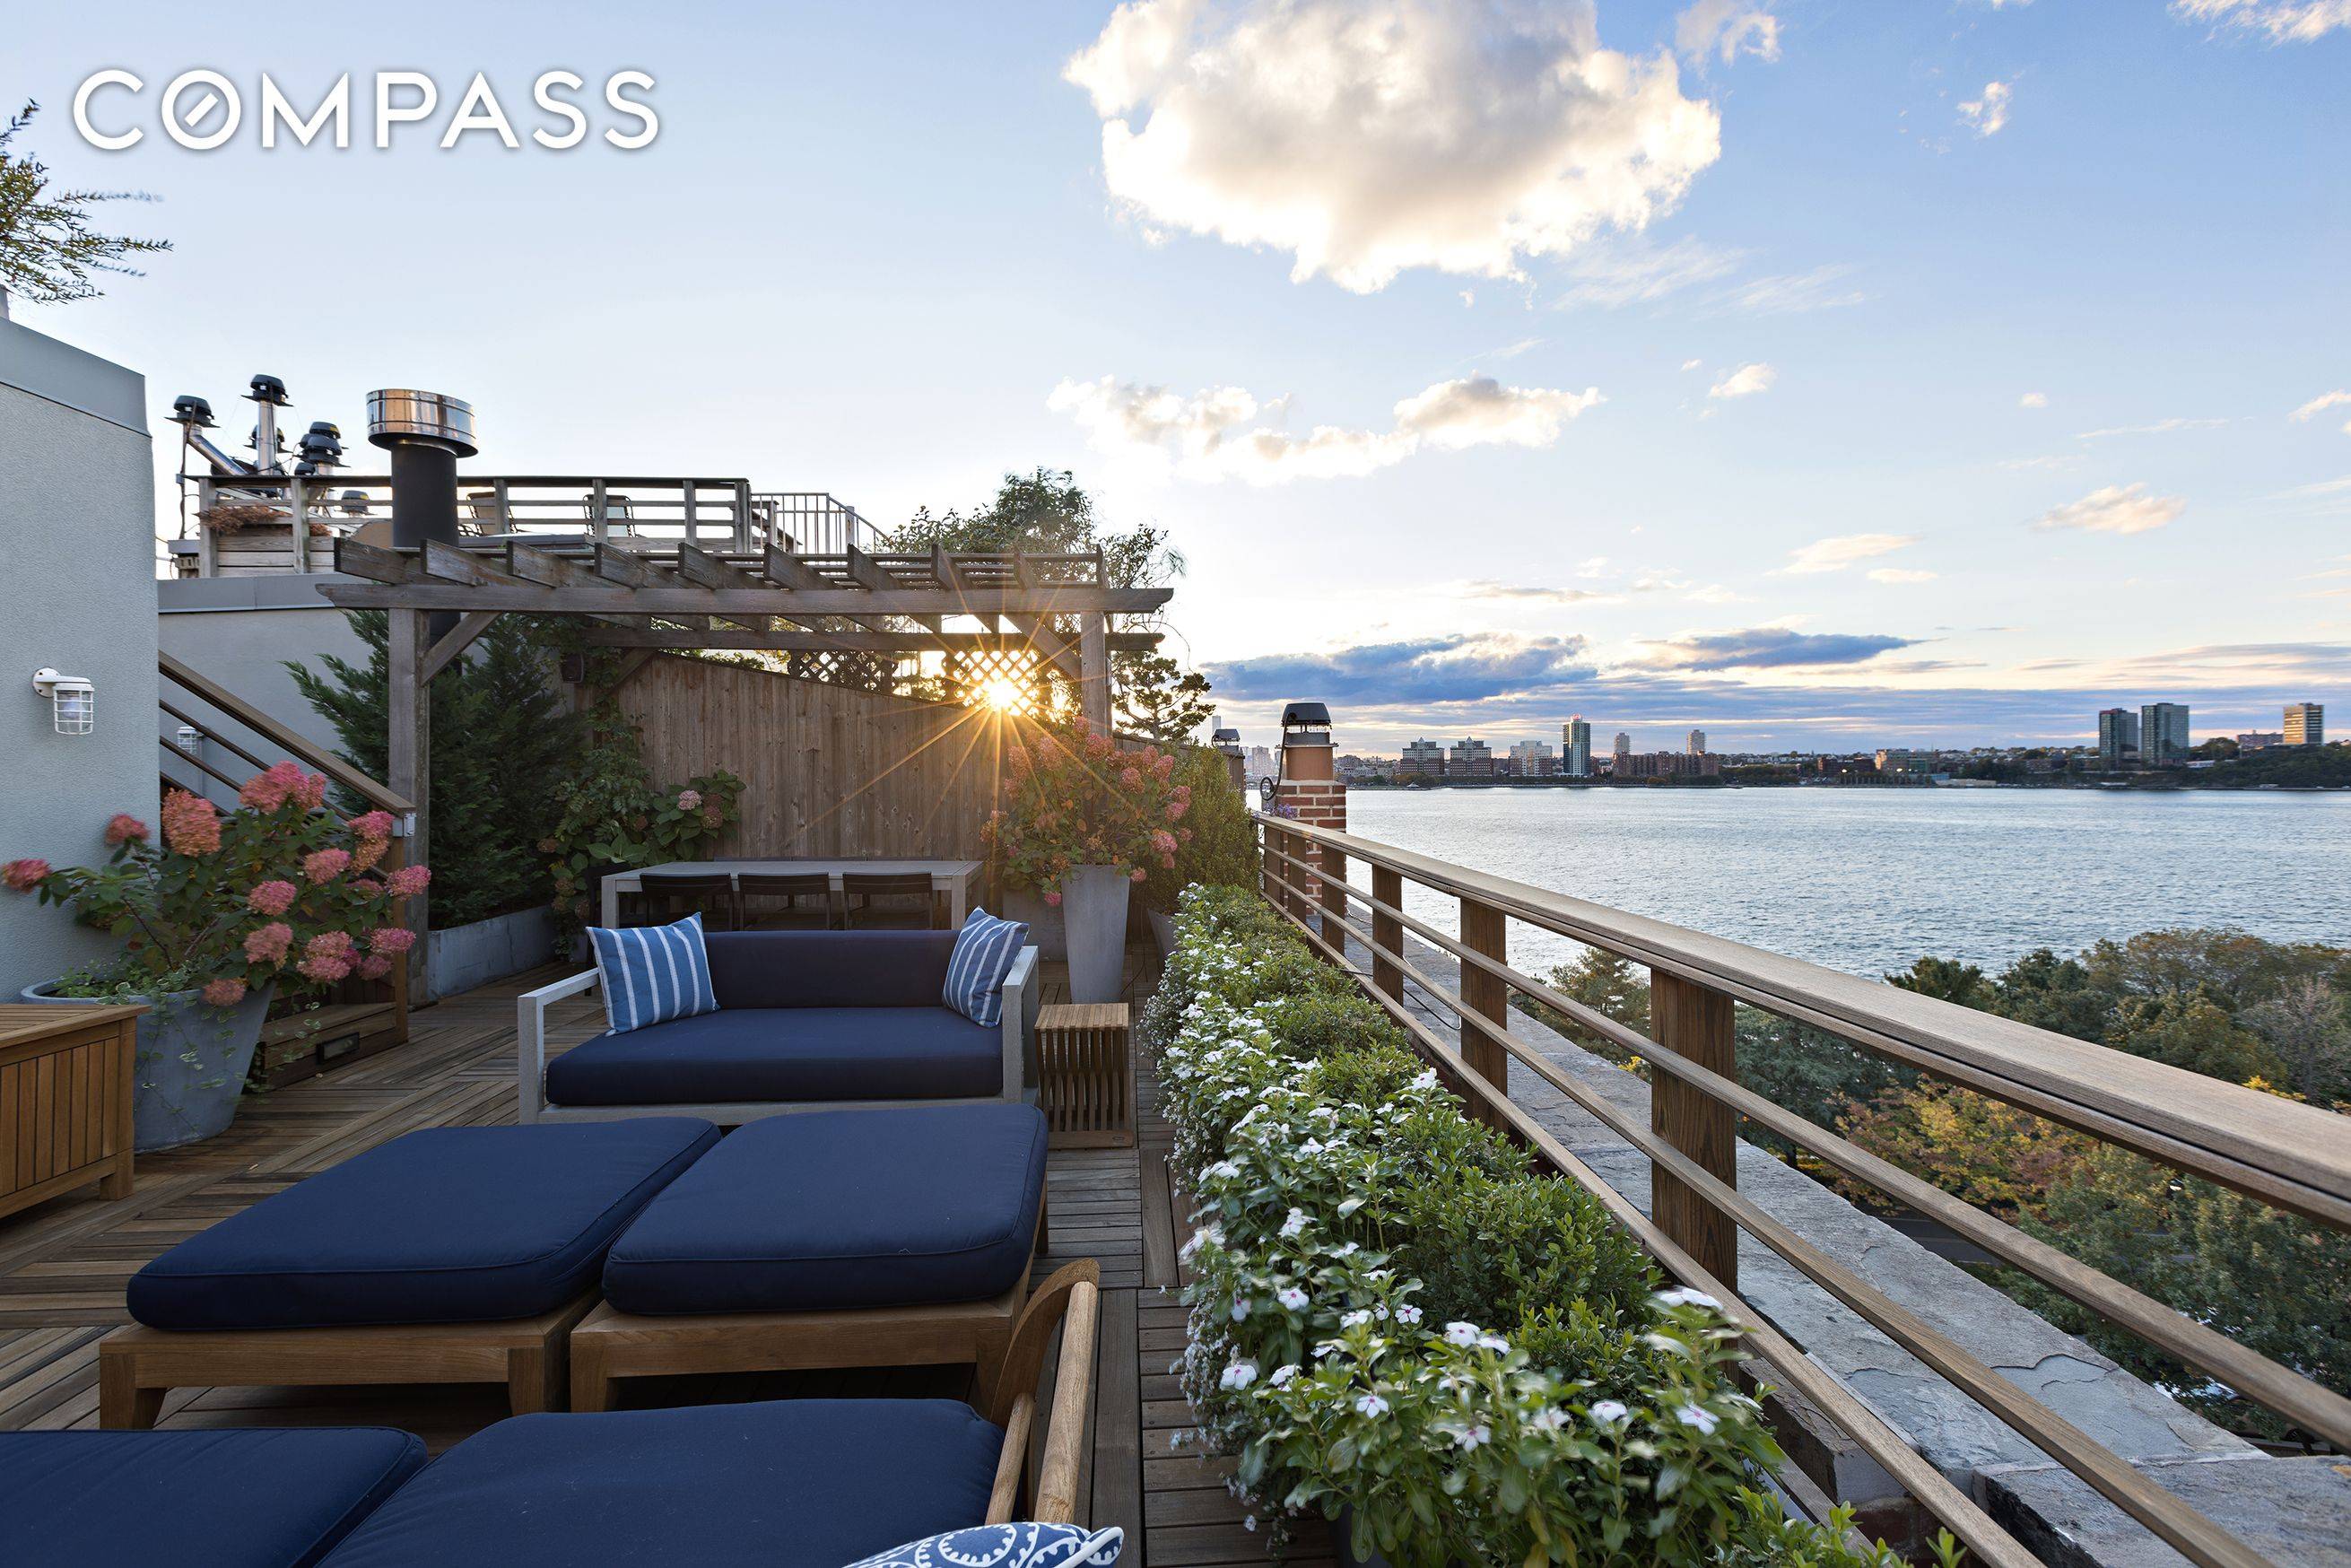 Unique and rare duplex loft penthouse in the heart of the vibrant West Village, perched atop a boutique cooperative, with breathtaking Hudson River views.